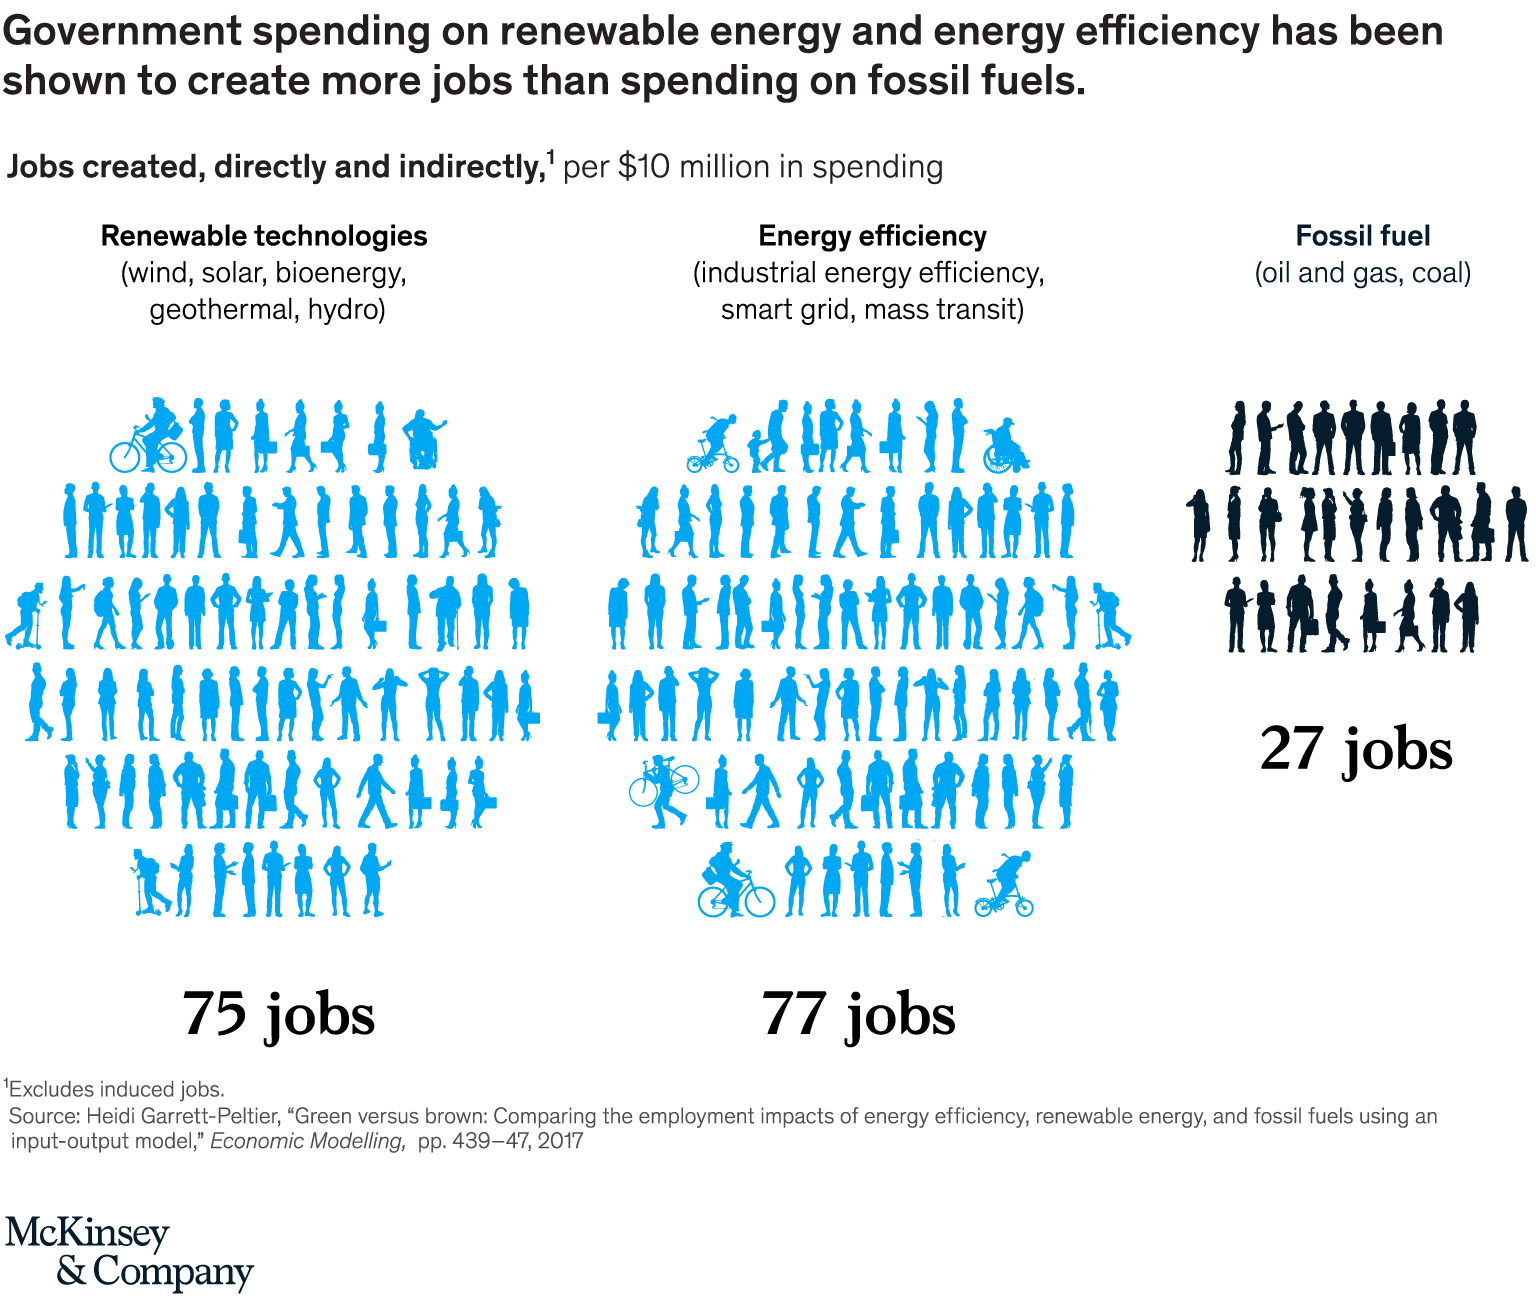 Government spending on renewable energy and energy efficiency has been shown to create more jobs than spending on fossil fuels.